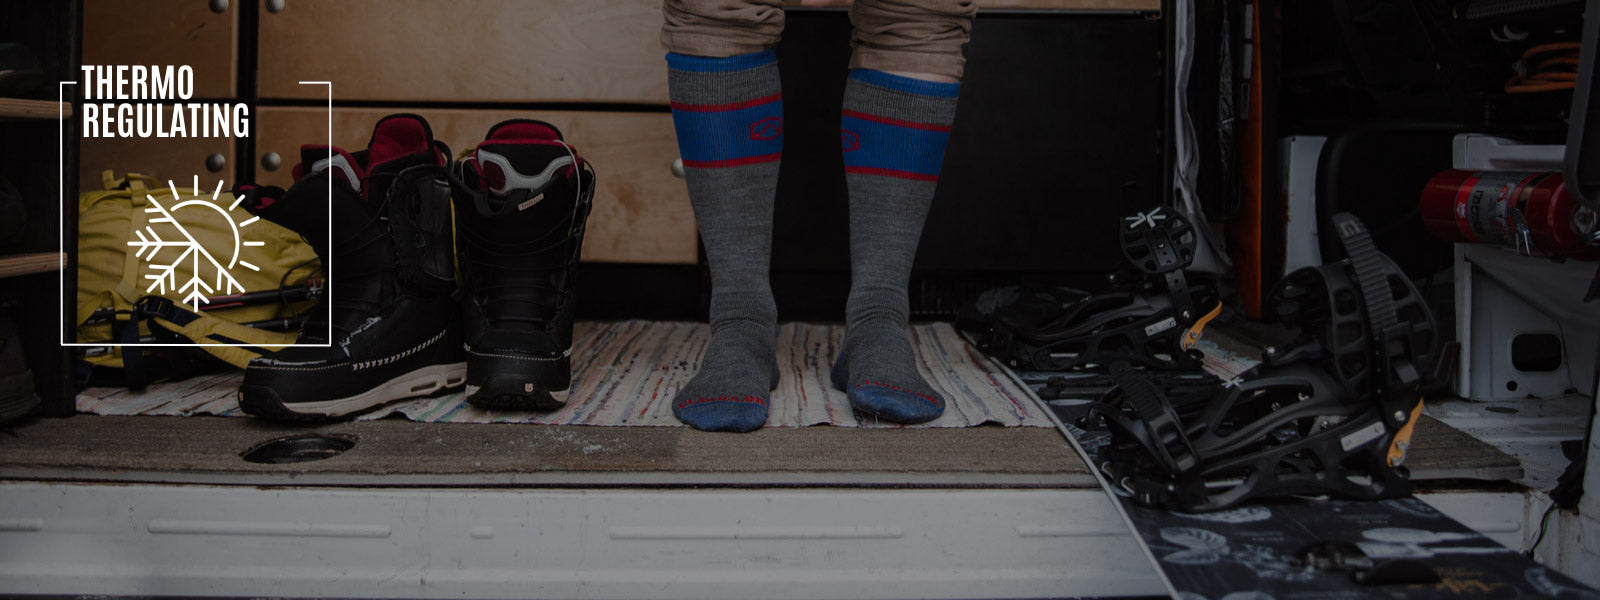 Snowboarder wearing Cloudline socks getting gear ready to hit the slopes. 